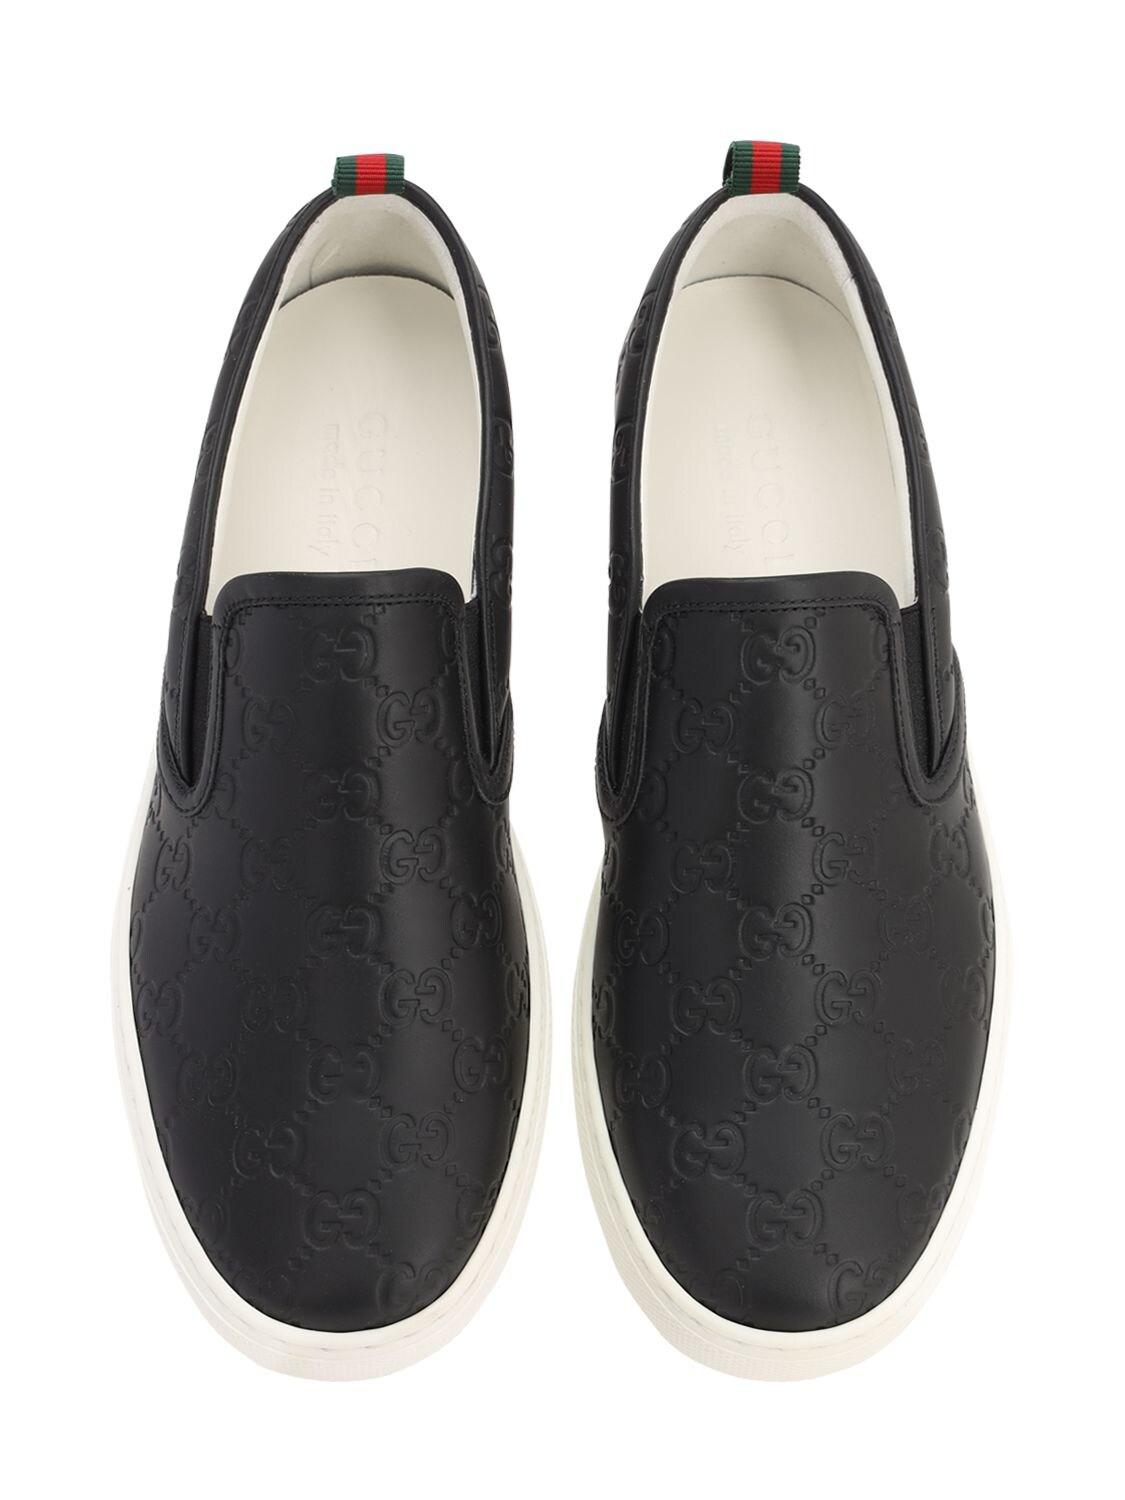 smog At redigere Mystisk Gucci 50mm Signature Leather Slip-on Sneakers in Black for Men - Lyst